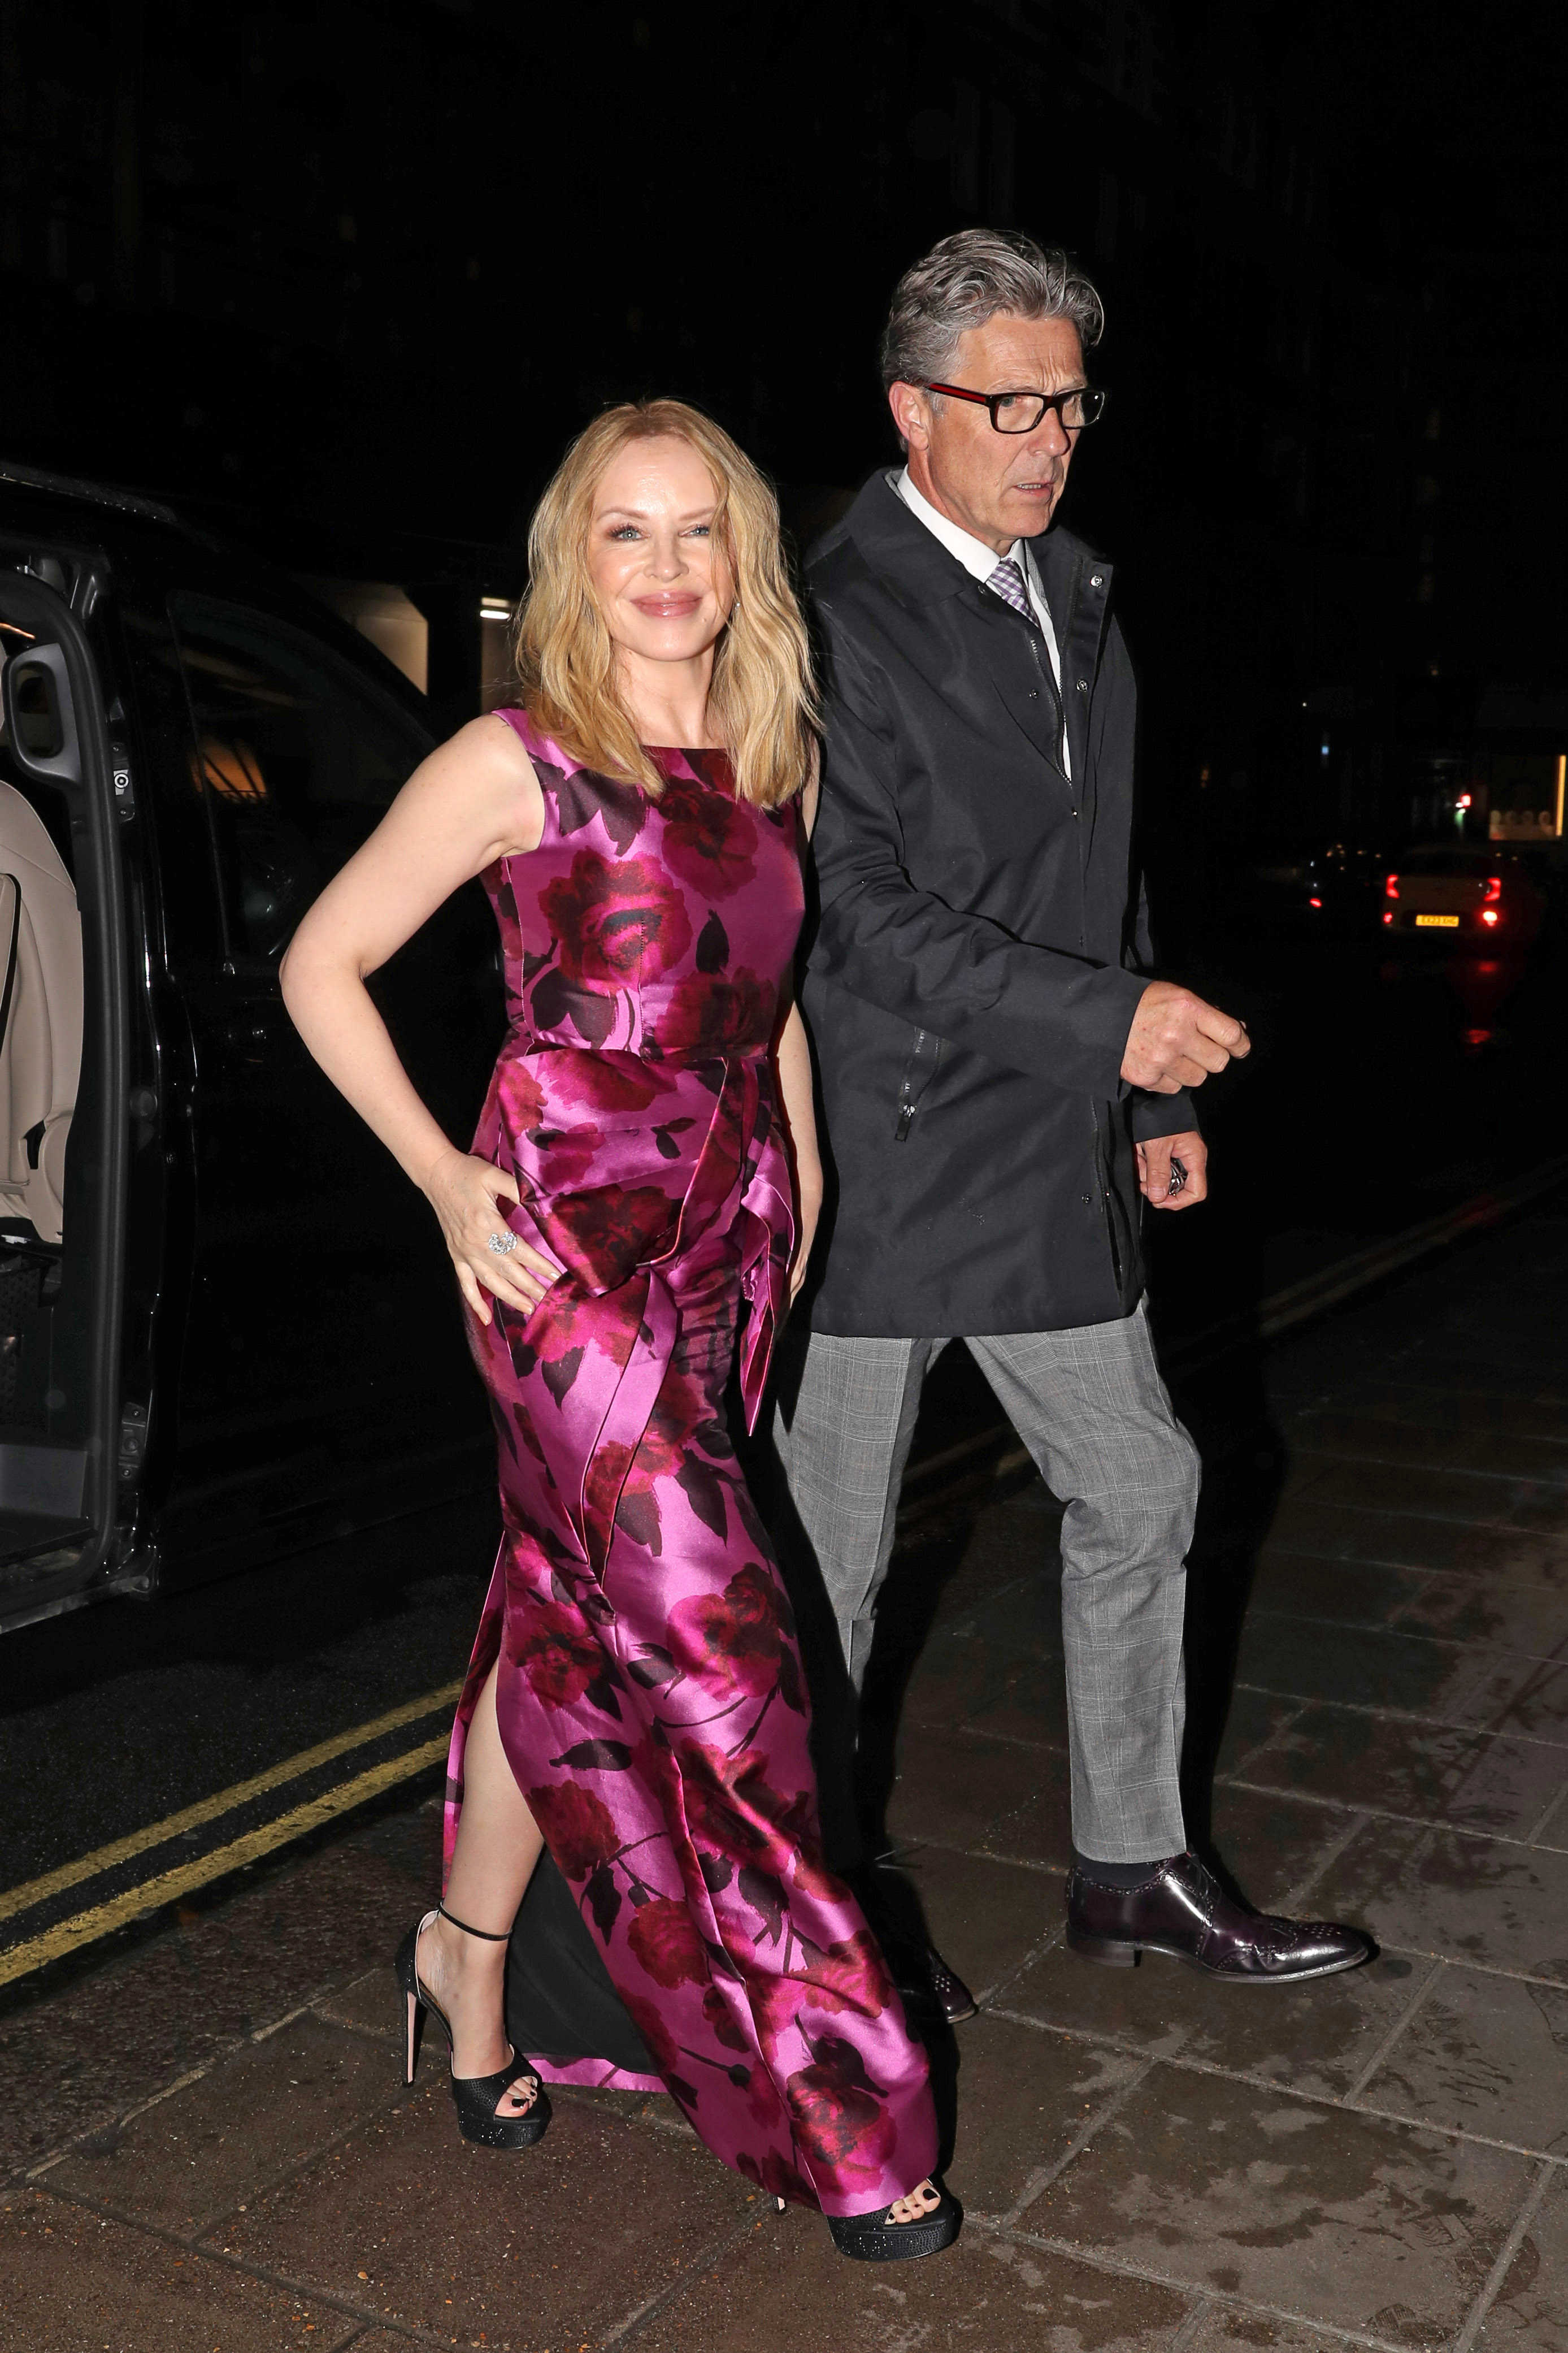 Kylie Minogue looked fabulous in a pink dress as she celebrated her 56th birthday